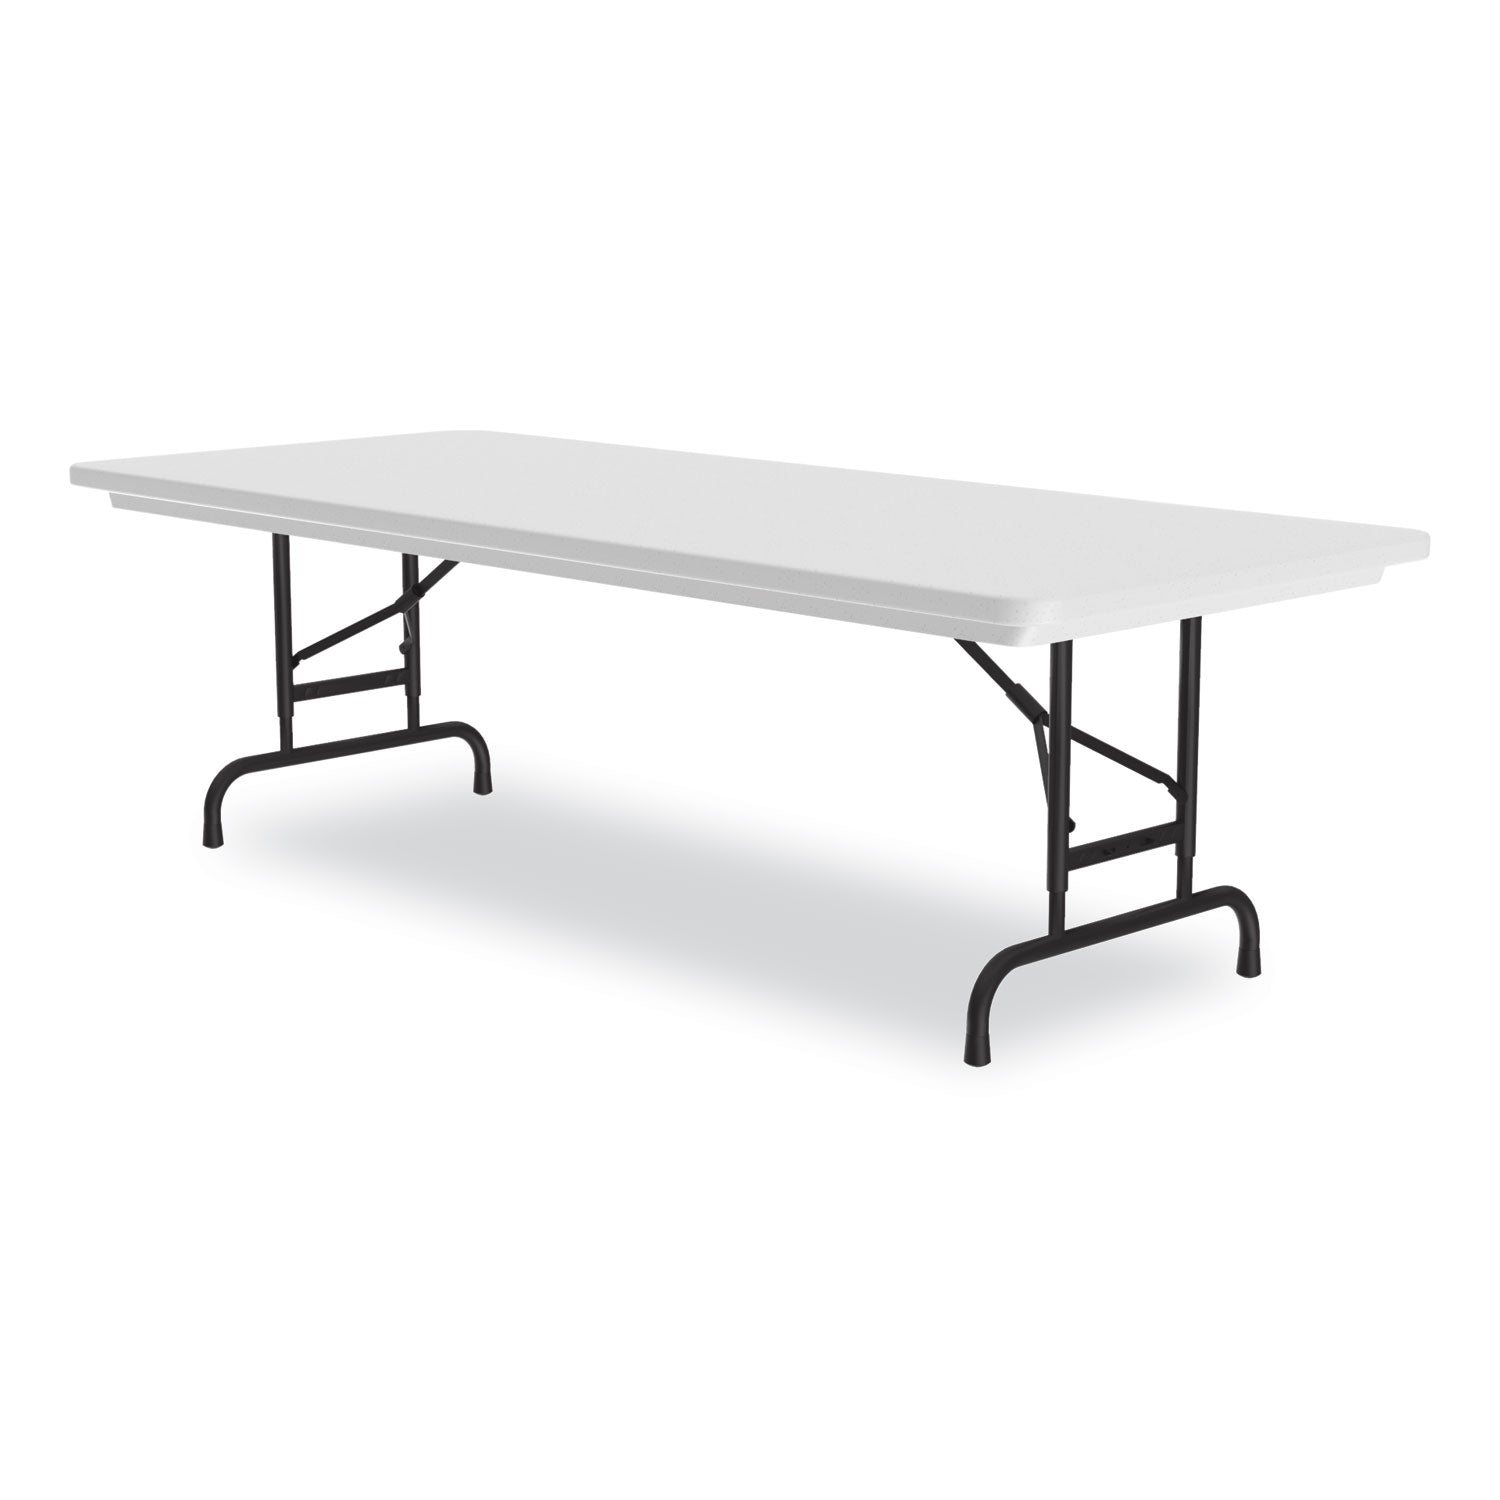 adjustable-folding-tables-rectangular-72-x-30-x-22-to-32-gray-top-black-legs-4-pallet-ships-in-4-6-business-days_crlra3072234p - 5